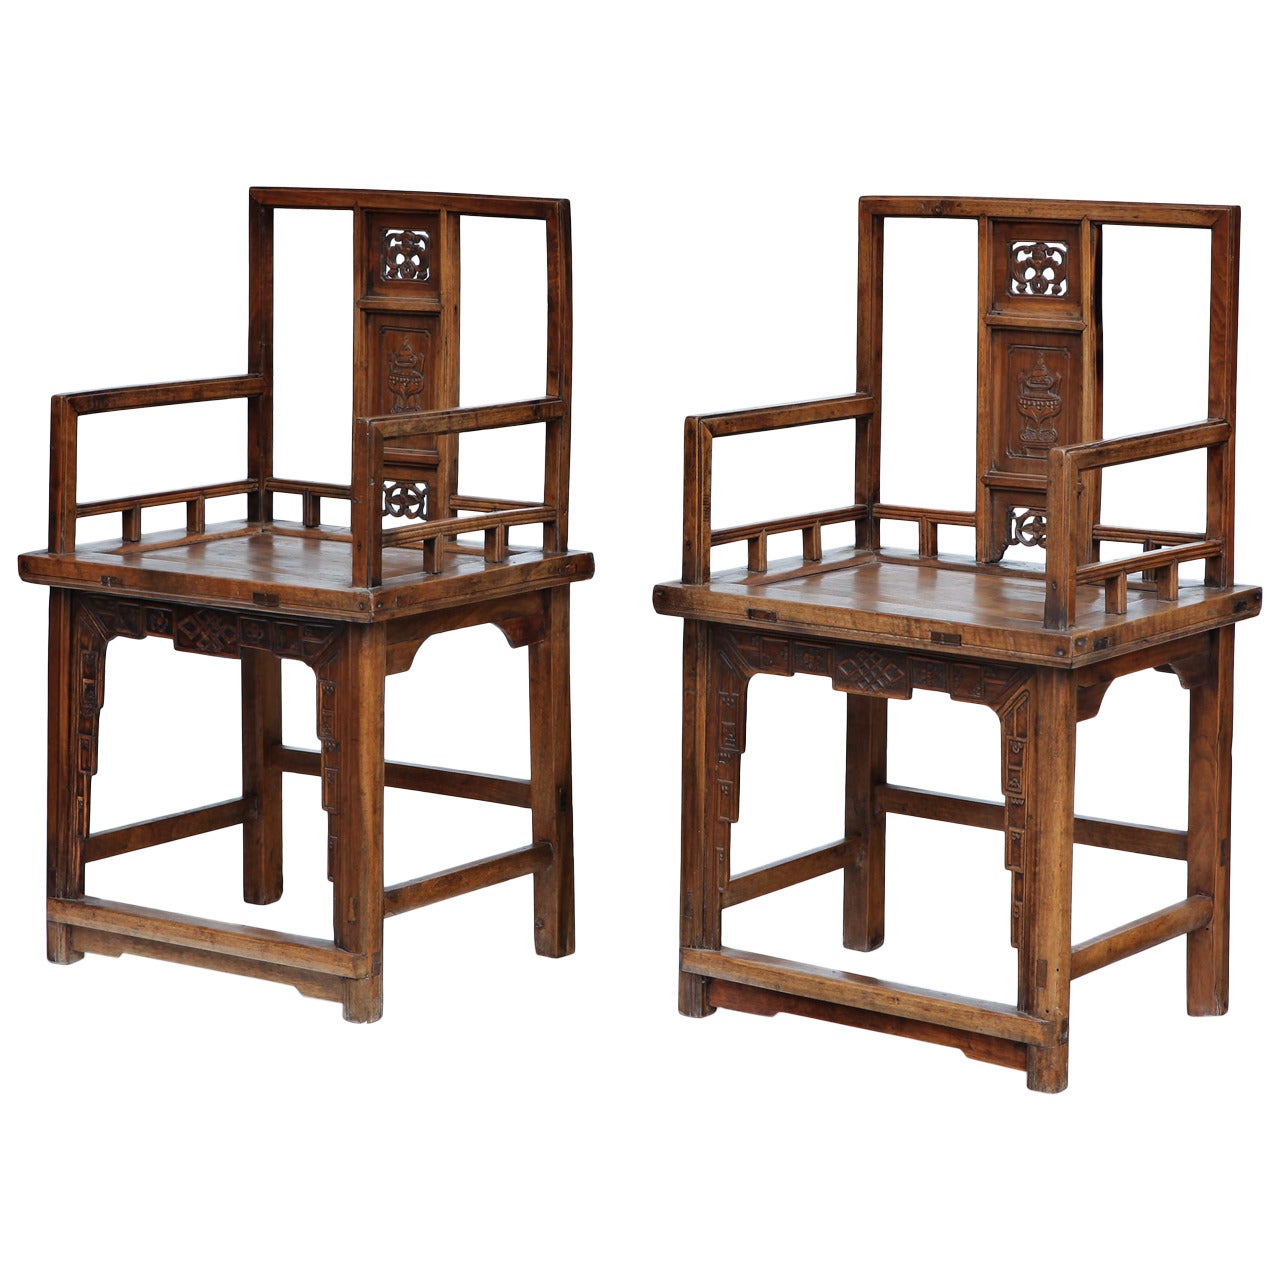 Pair of Quing Dynasty Chairs, Camphor Wood For Sale